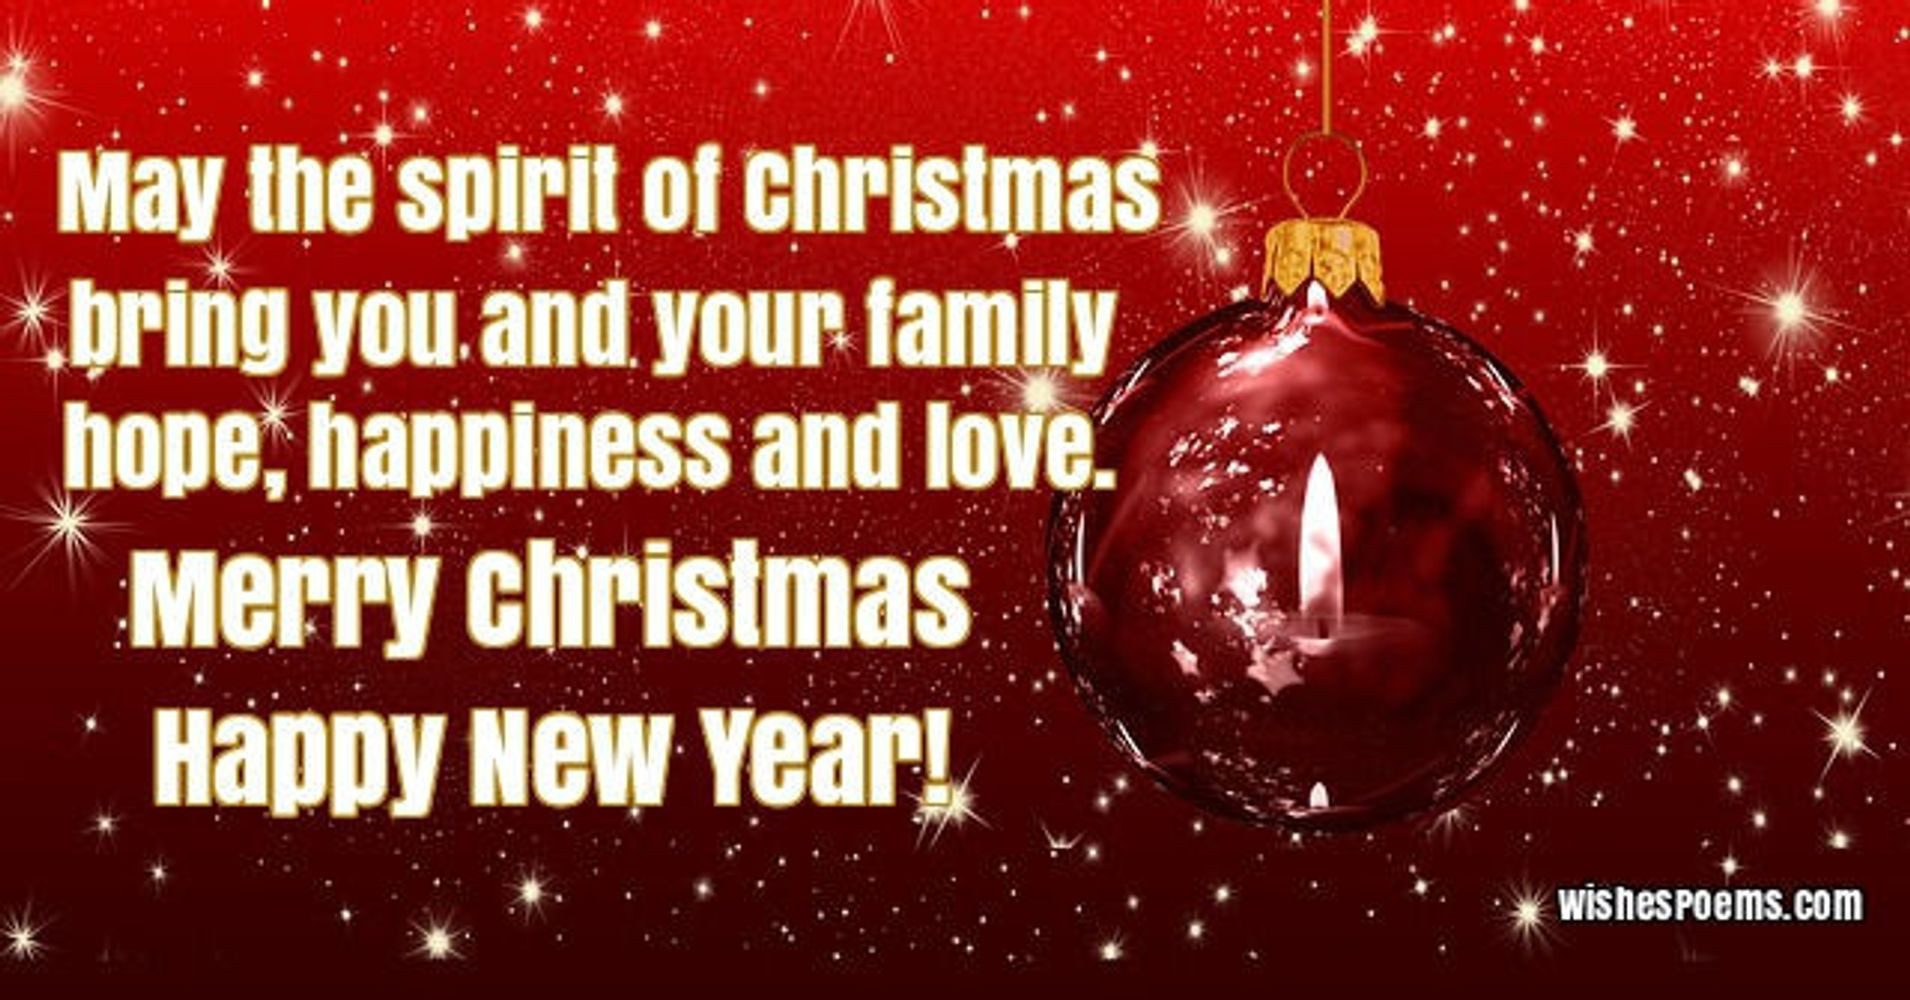 Merry Christmas Wishes Quotes
 35 Christmas Card Messages What to Write in a Christmas